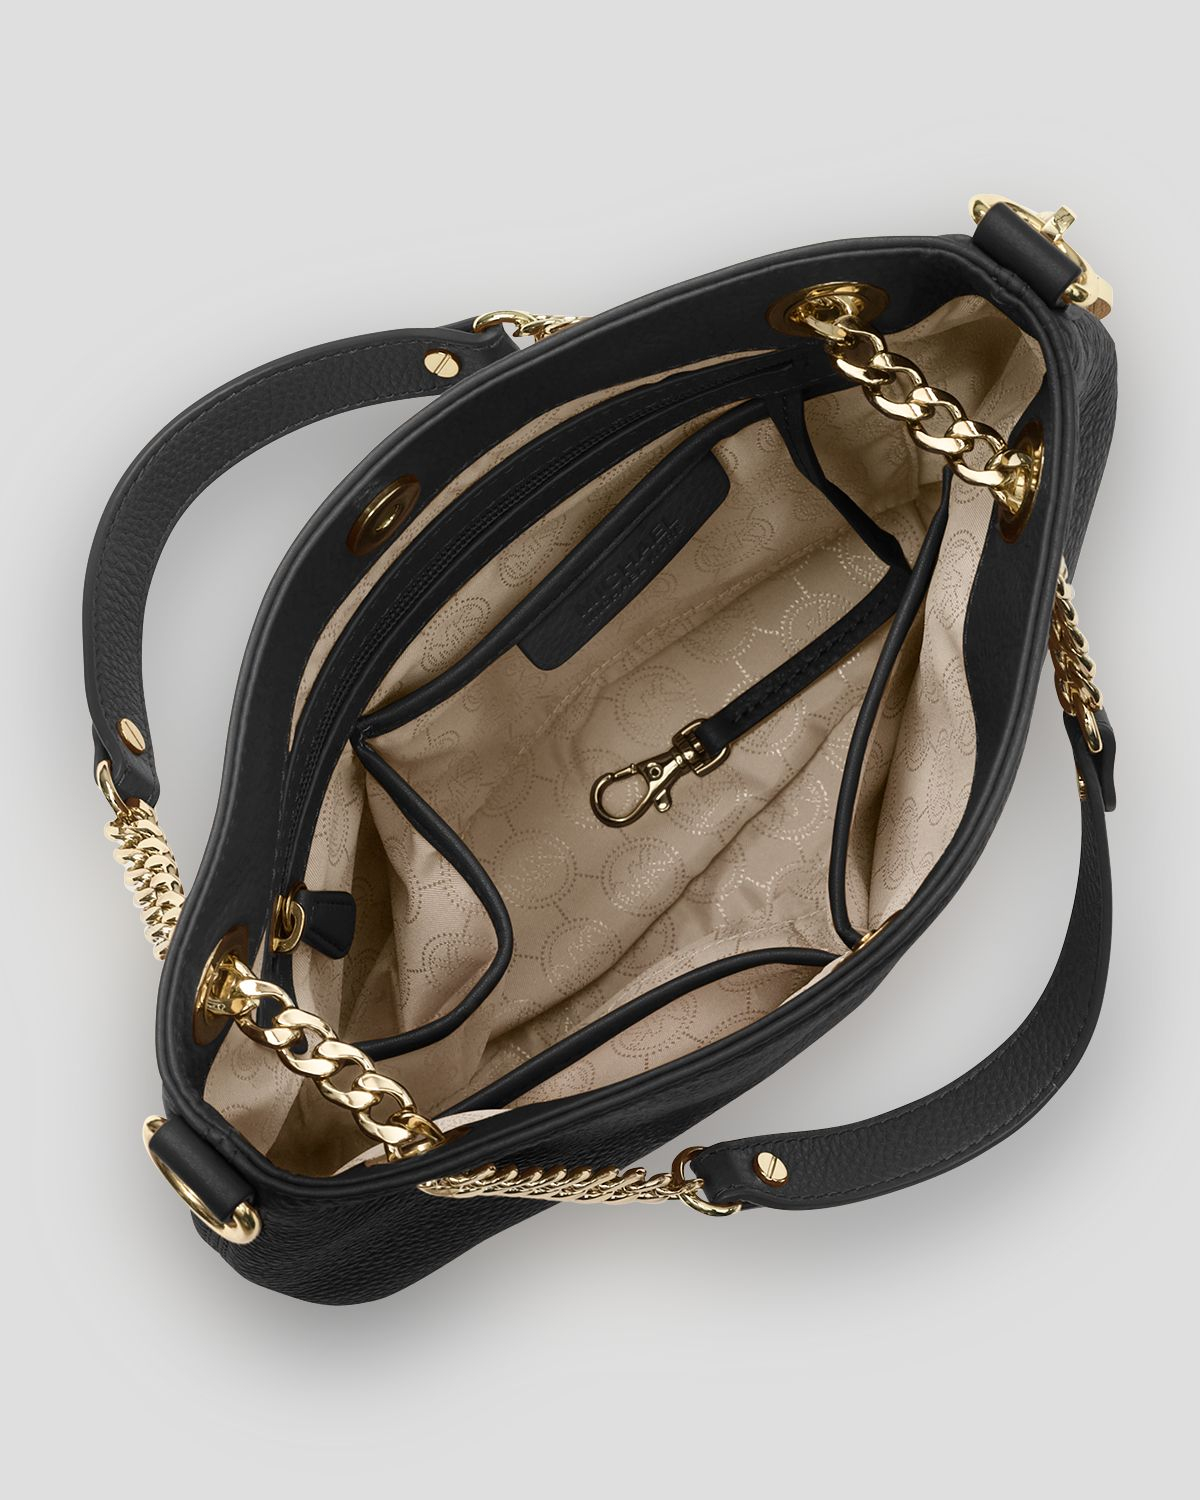 michael kors bags with chain handles